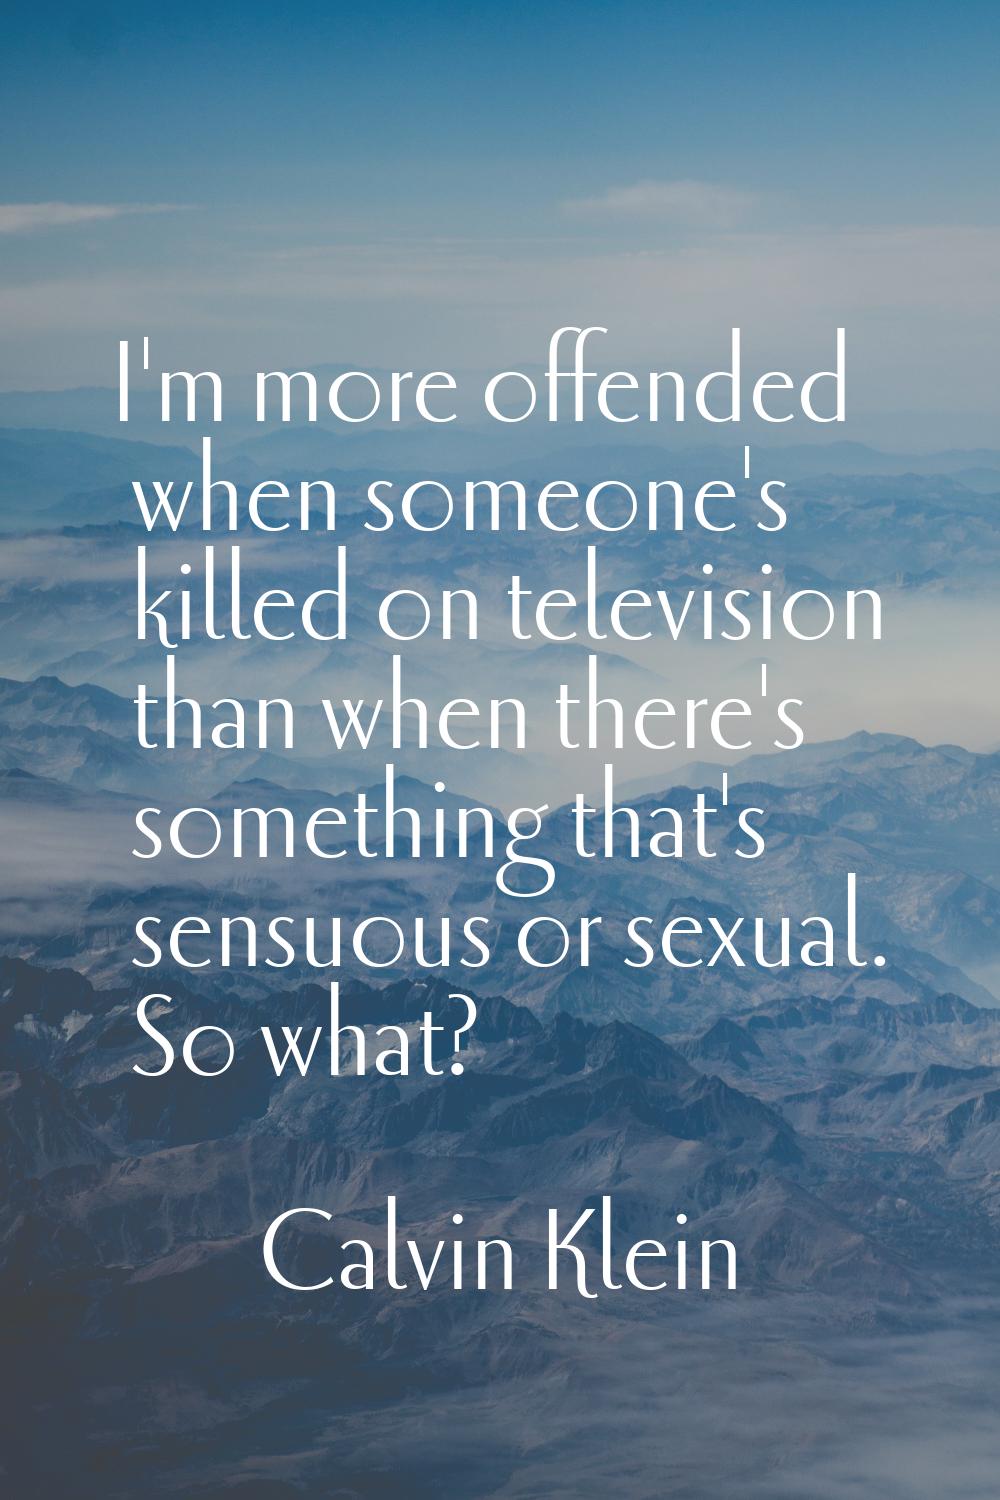 I'm more offended when someone's killed on television than when there's something that's sensuous o